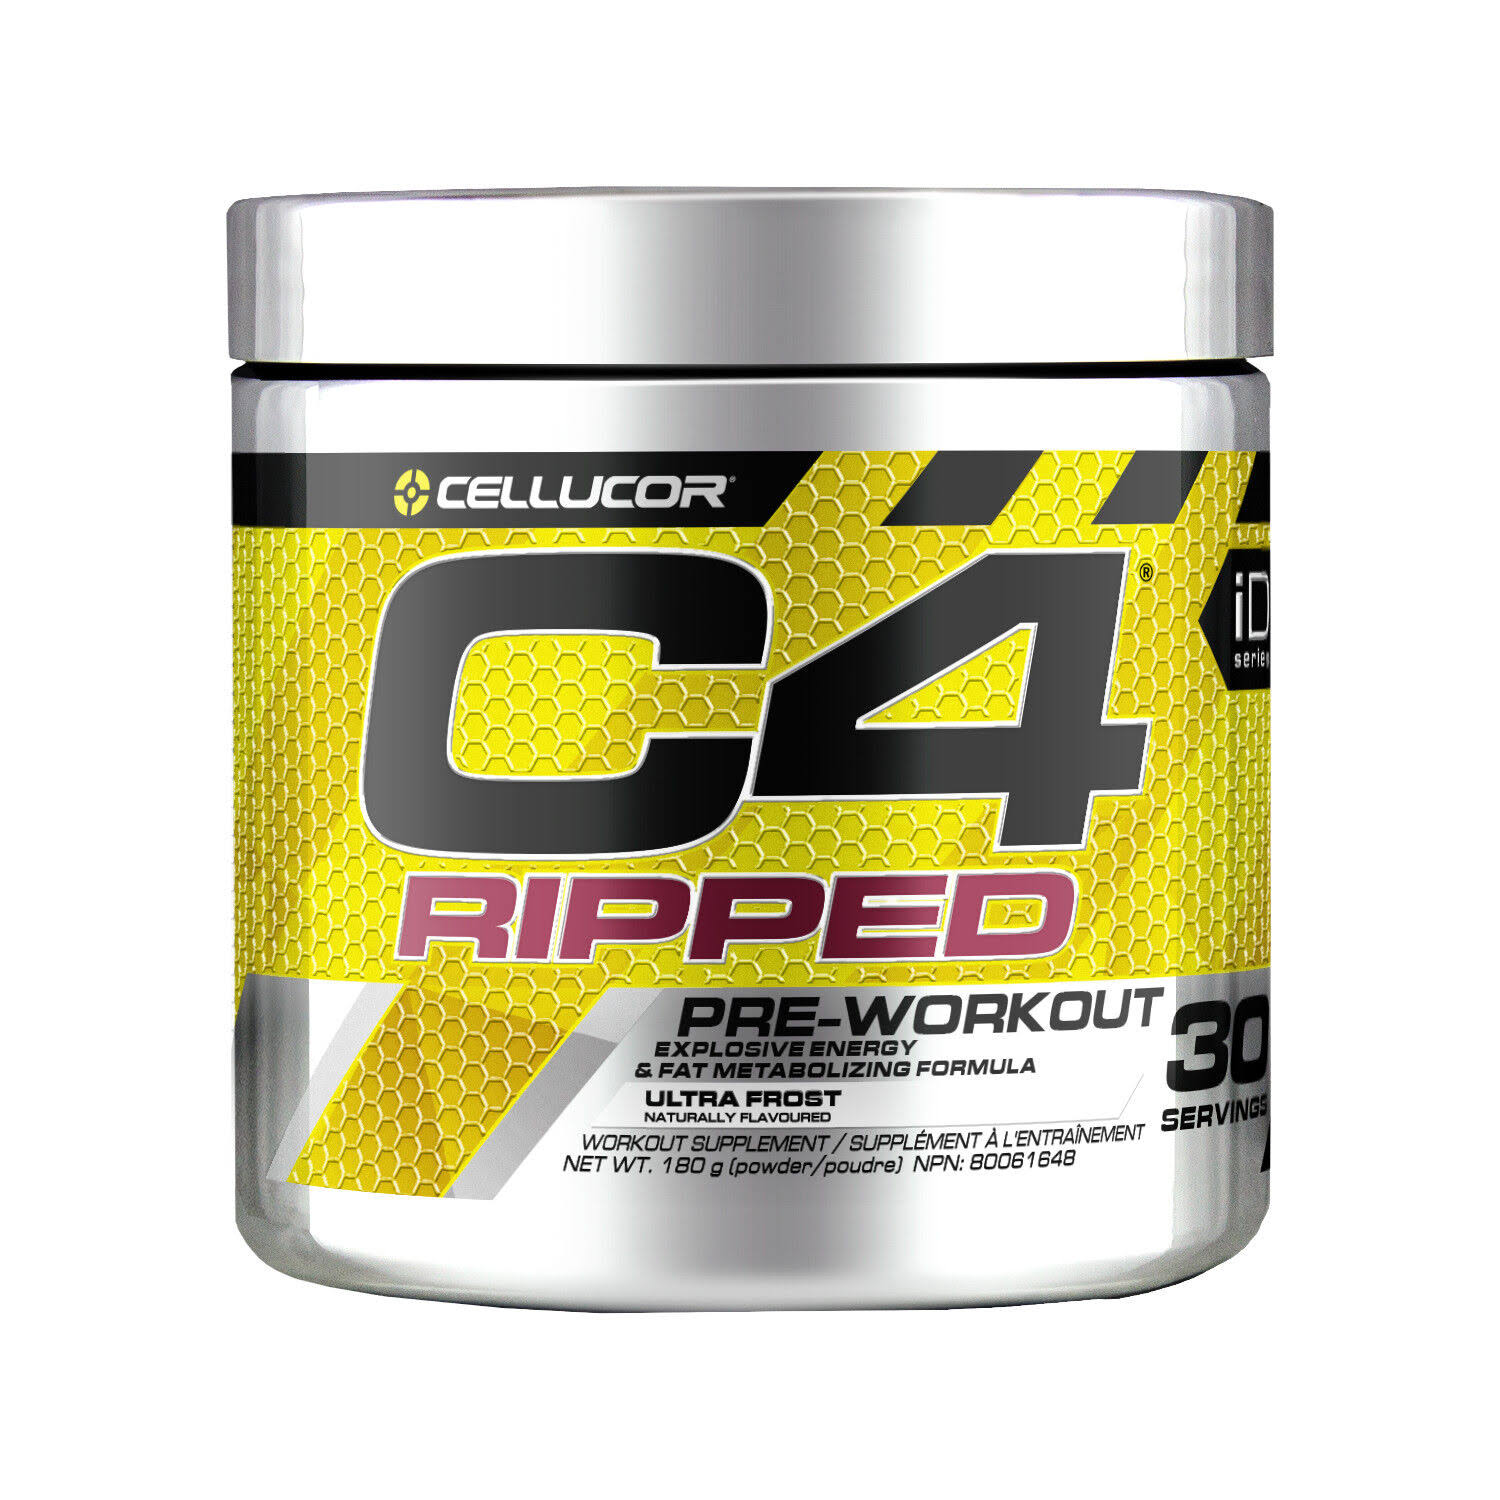 Cellucor C4 Ripped Pre-Workout - Ultra Frost Beta Alanine, 30g | GNC